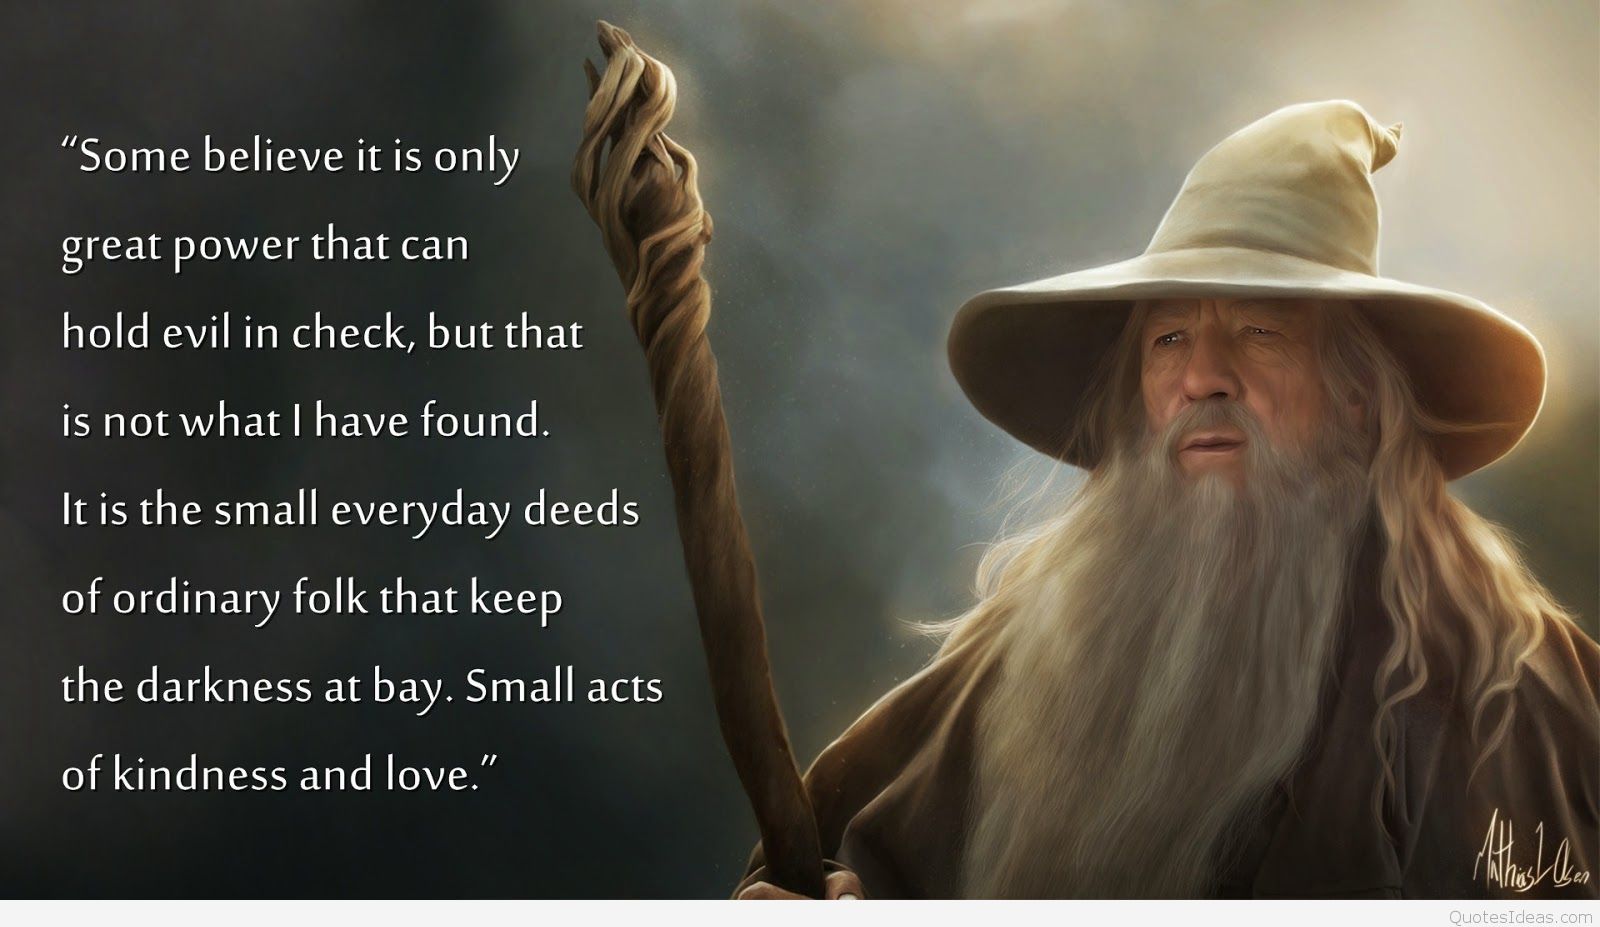 Lord Of The Rings Quotes Wallpapers - Wallpaper Cave